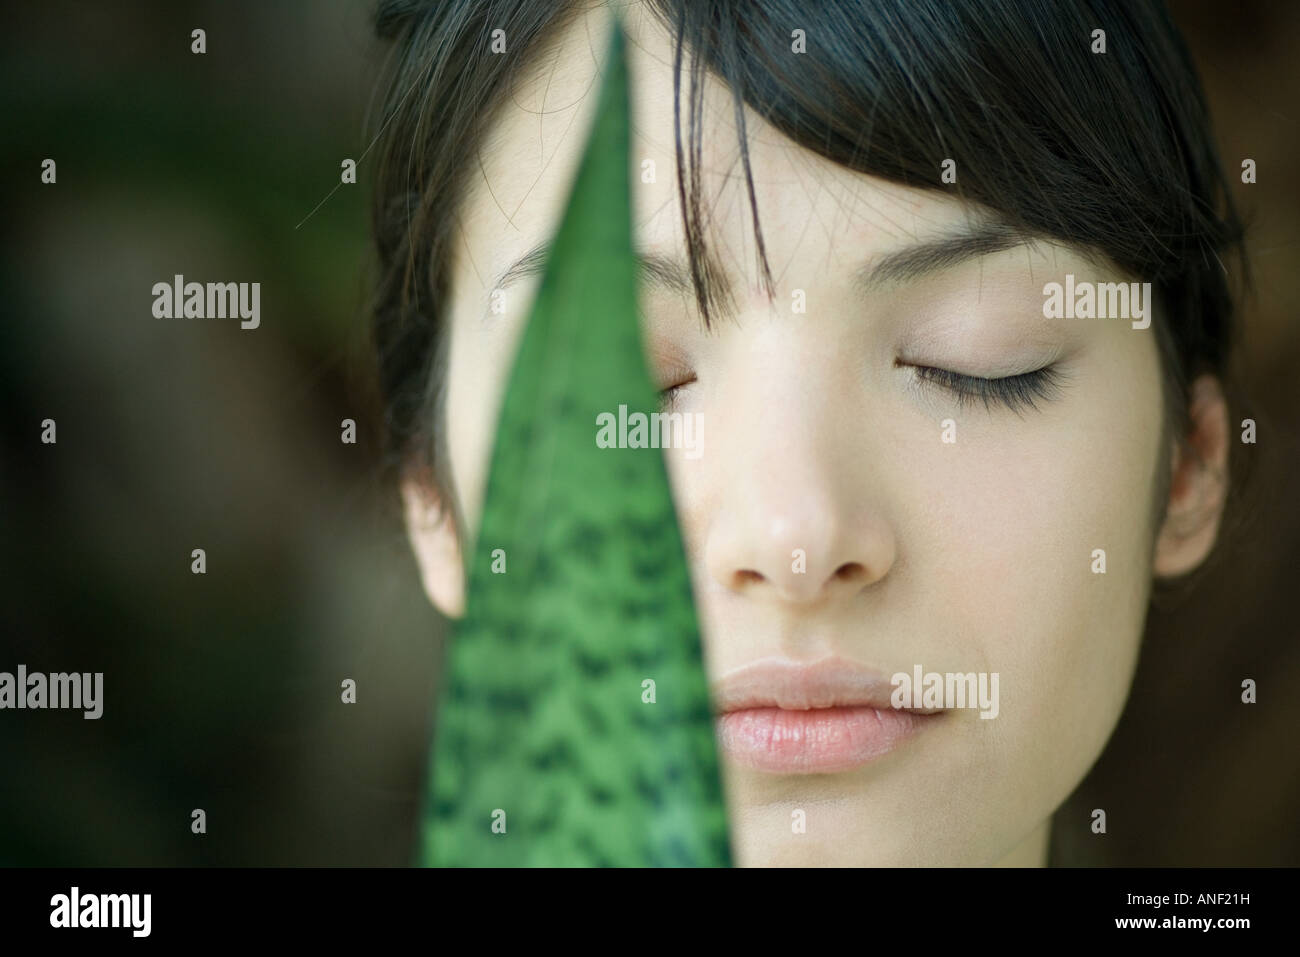 Snake plant leaf in front of woman's face, eyes closed, close-up Stock Photo